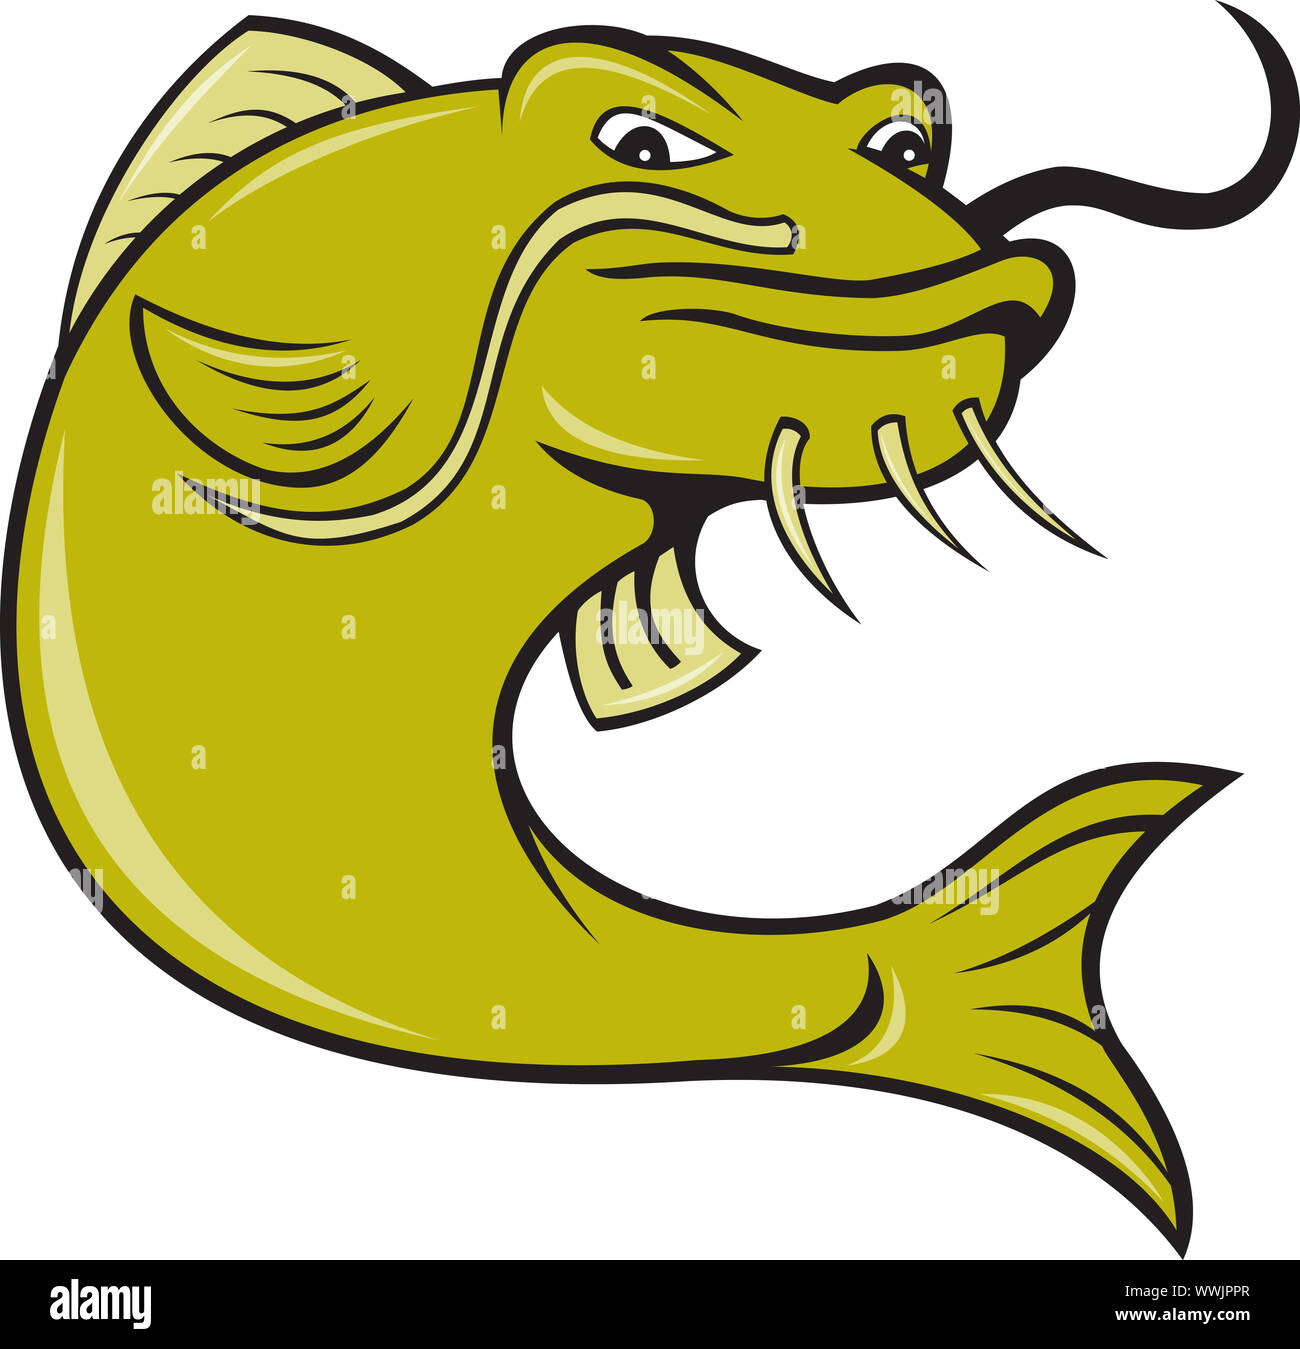 illustration of angry catfish done in cartoon style on isolated white background. Stock Photo